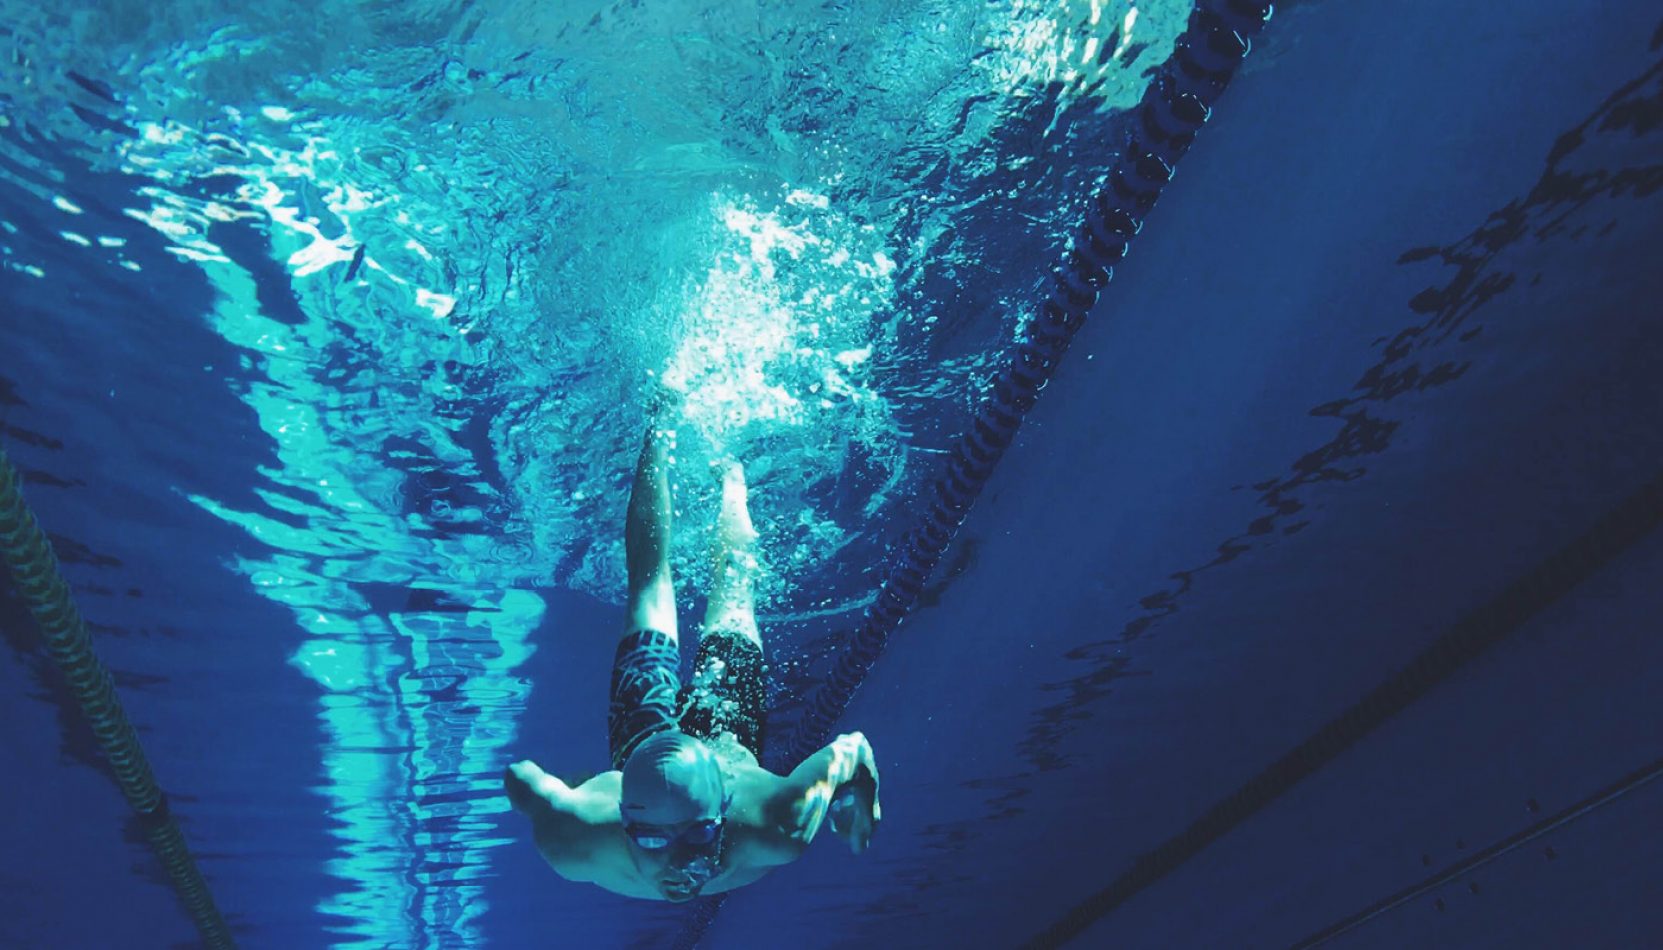 SWIMMING, SPORTS, SPORTS EVENTS, SURREY, WHATS ON, GET FIT, GET HEALTHY